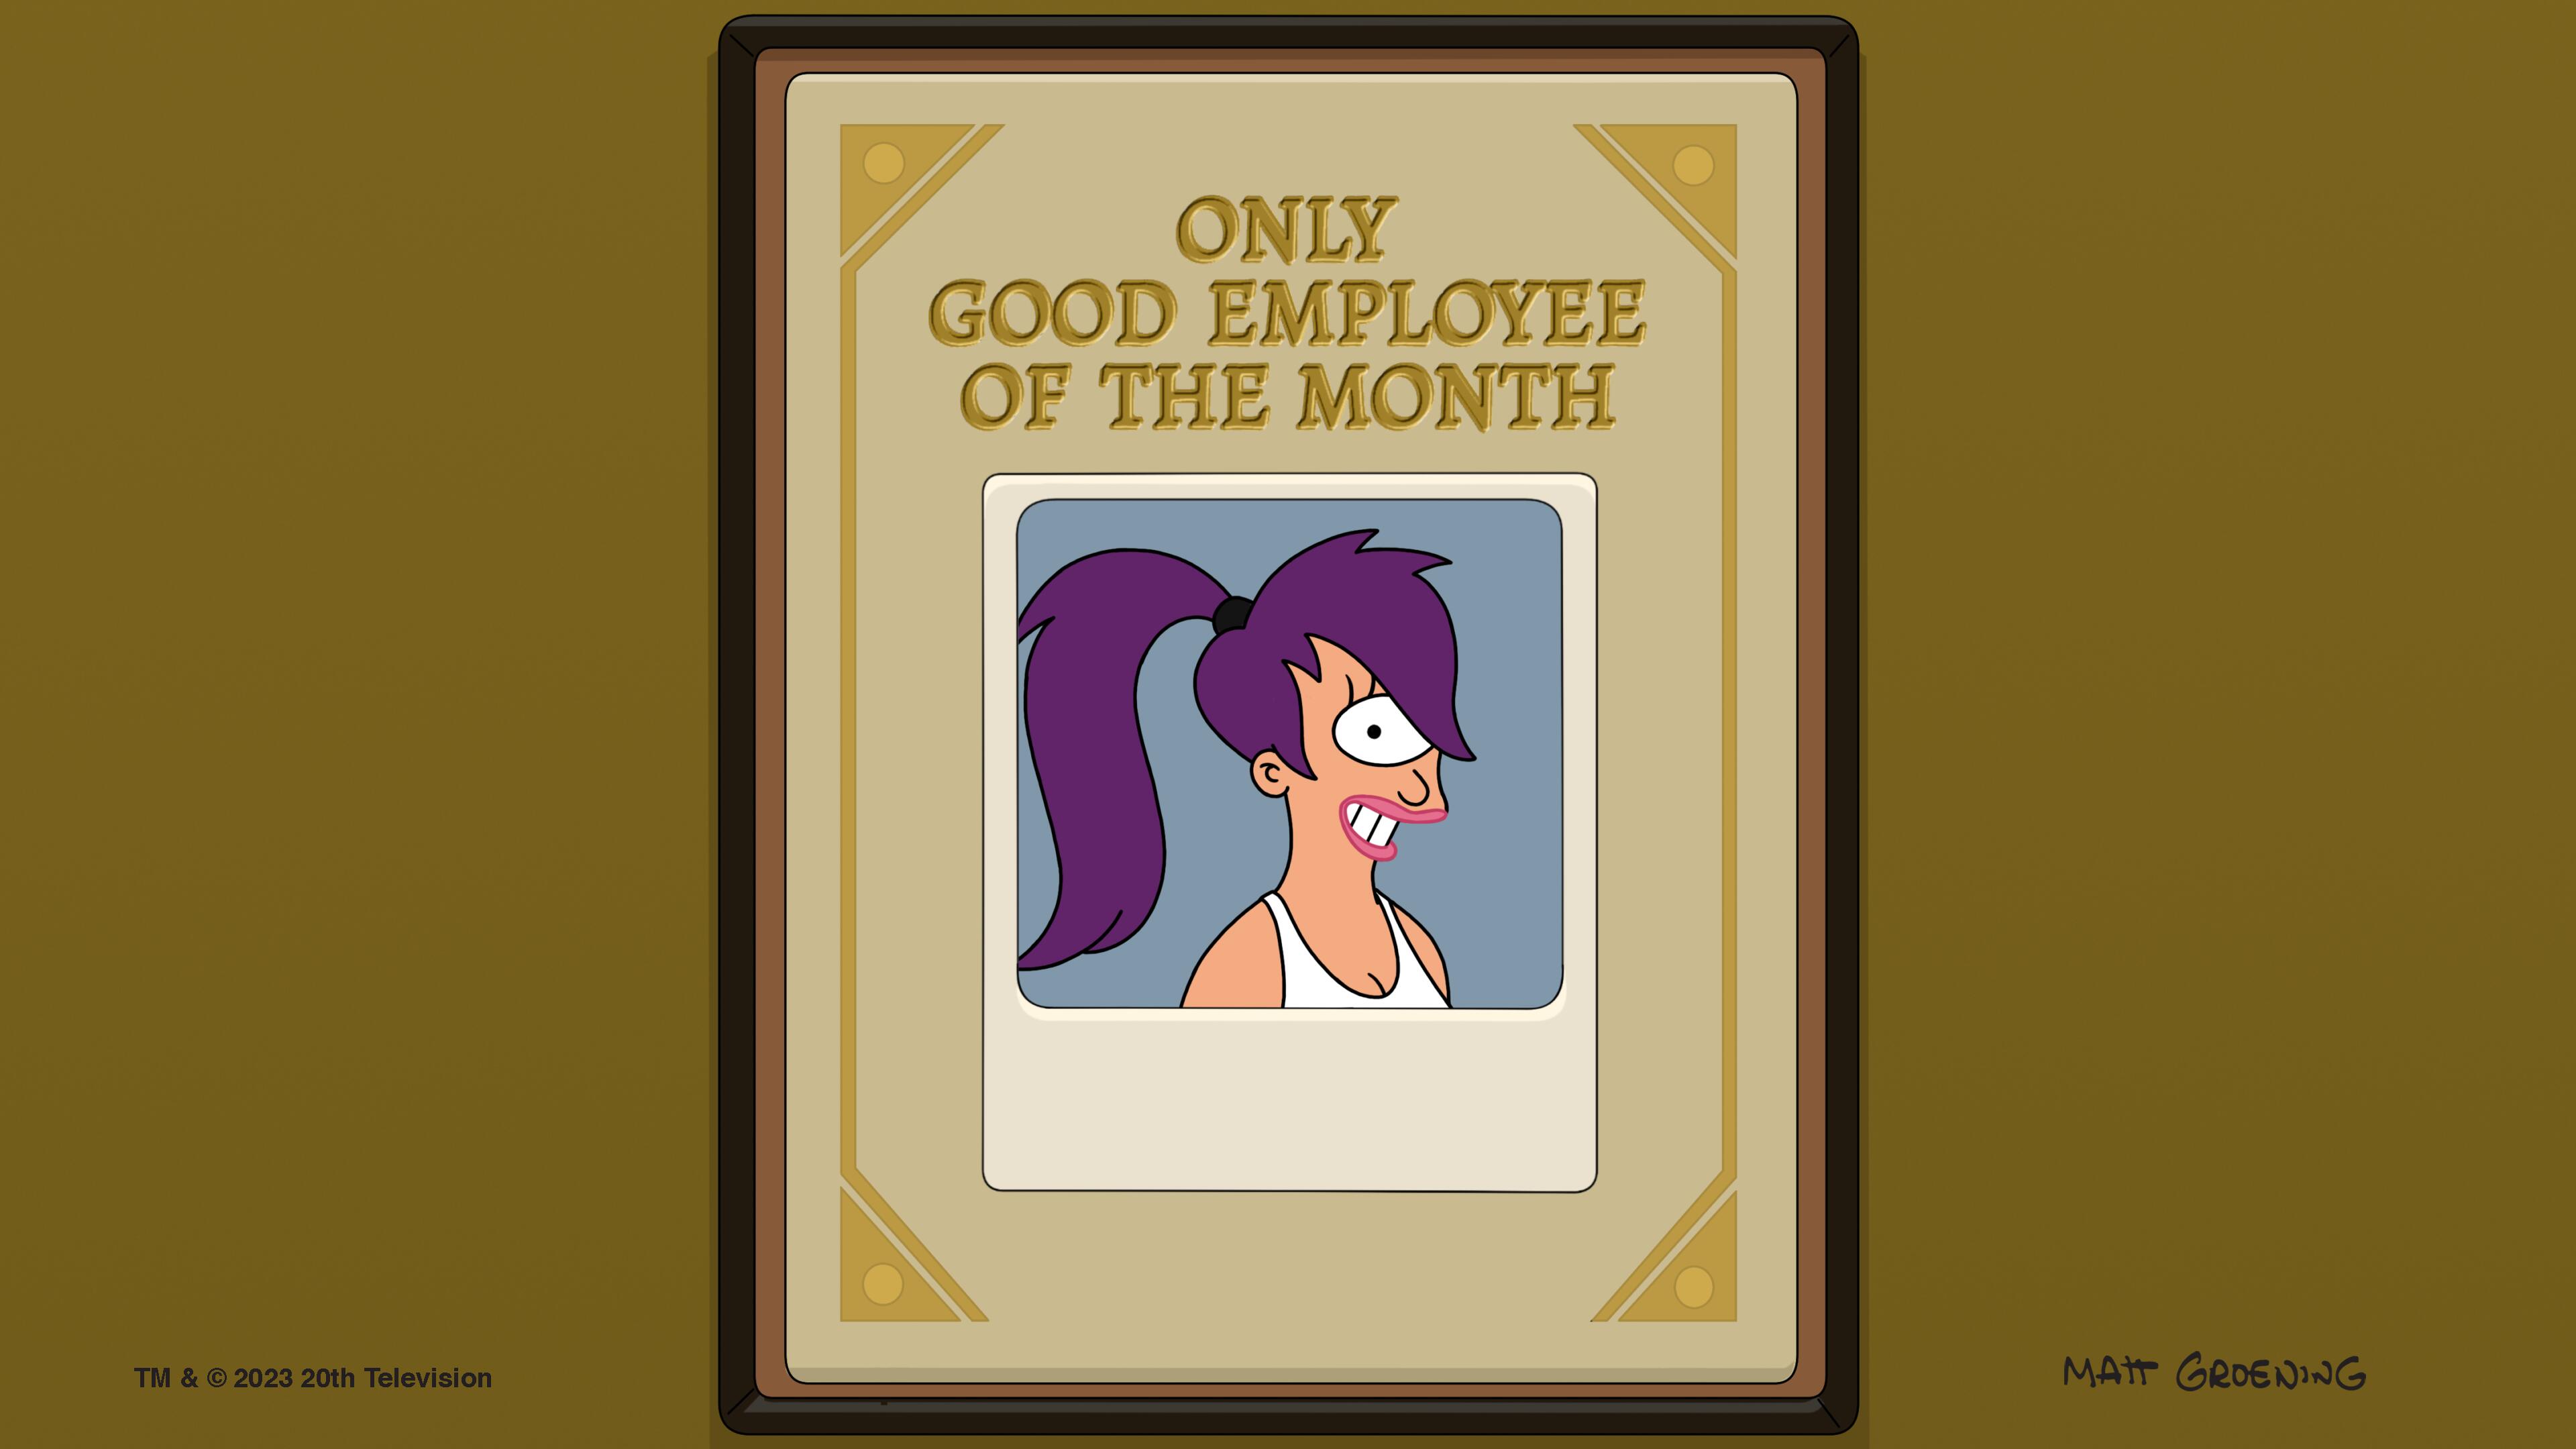 Turanga Leela (Katey Sagal) on the PlanEx "Only Good Employee of the Month" plaque.